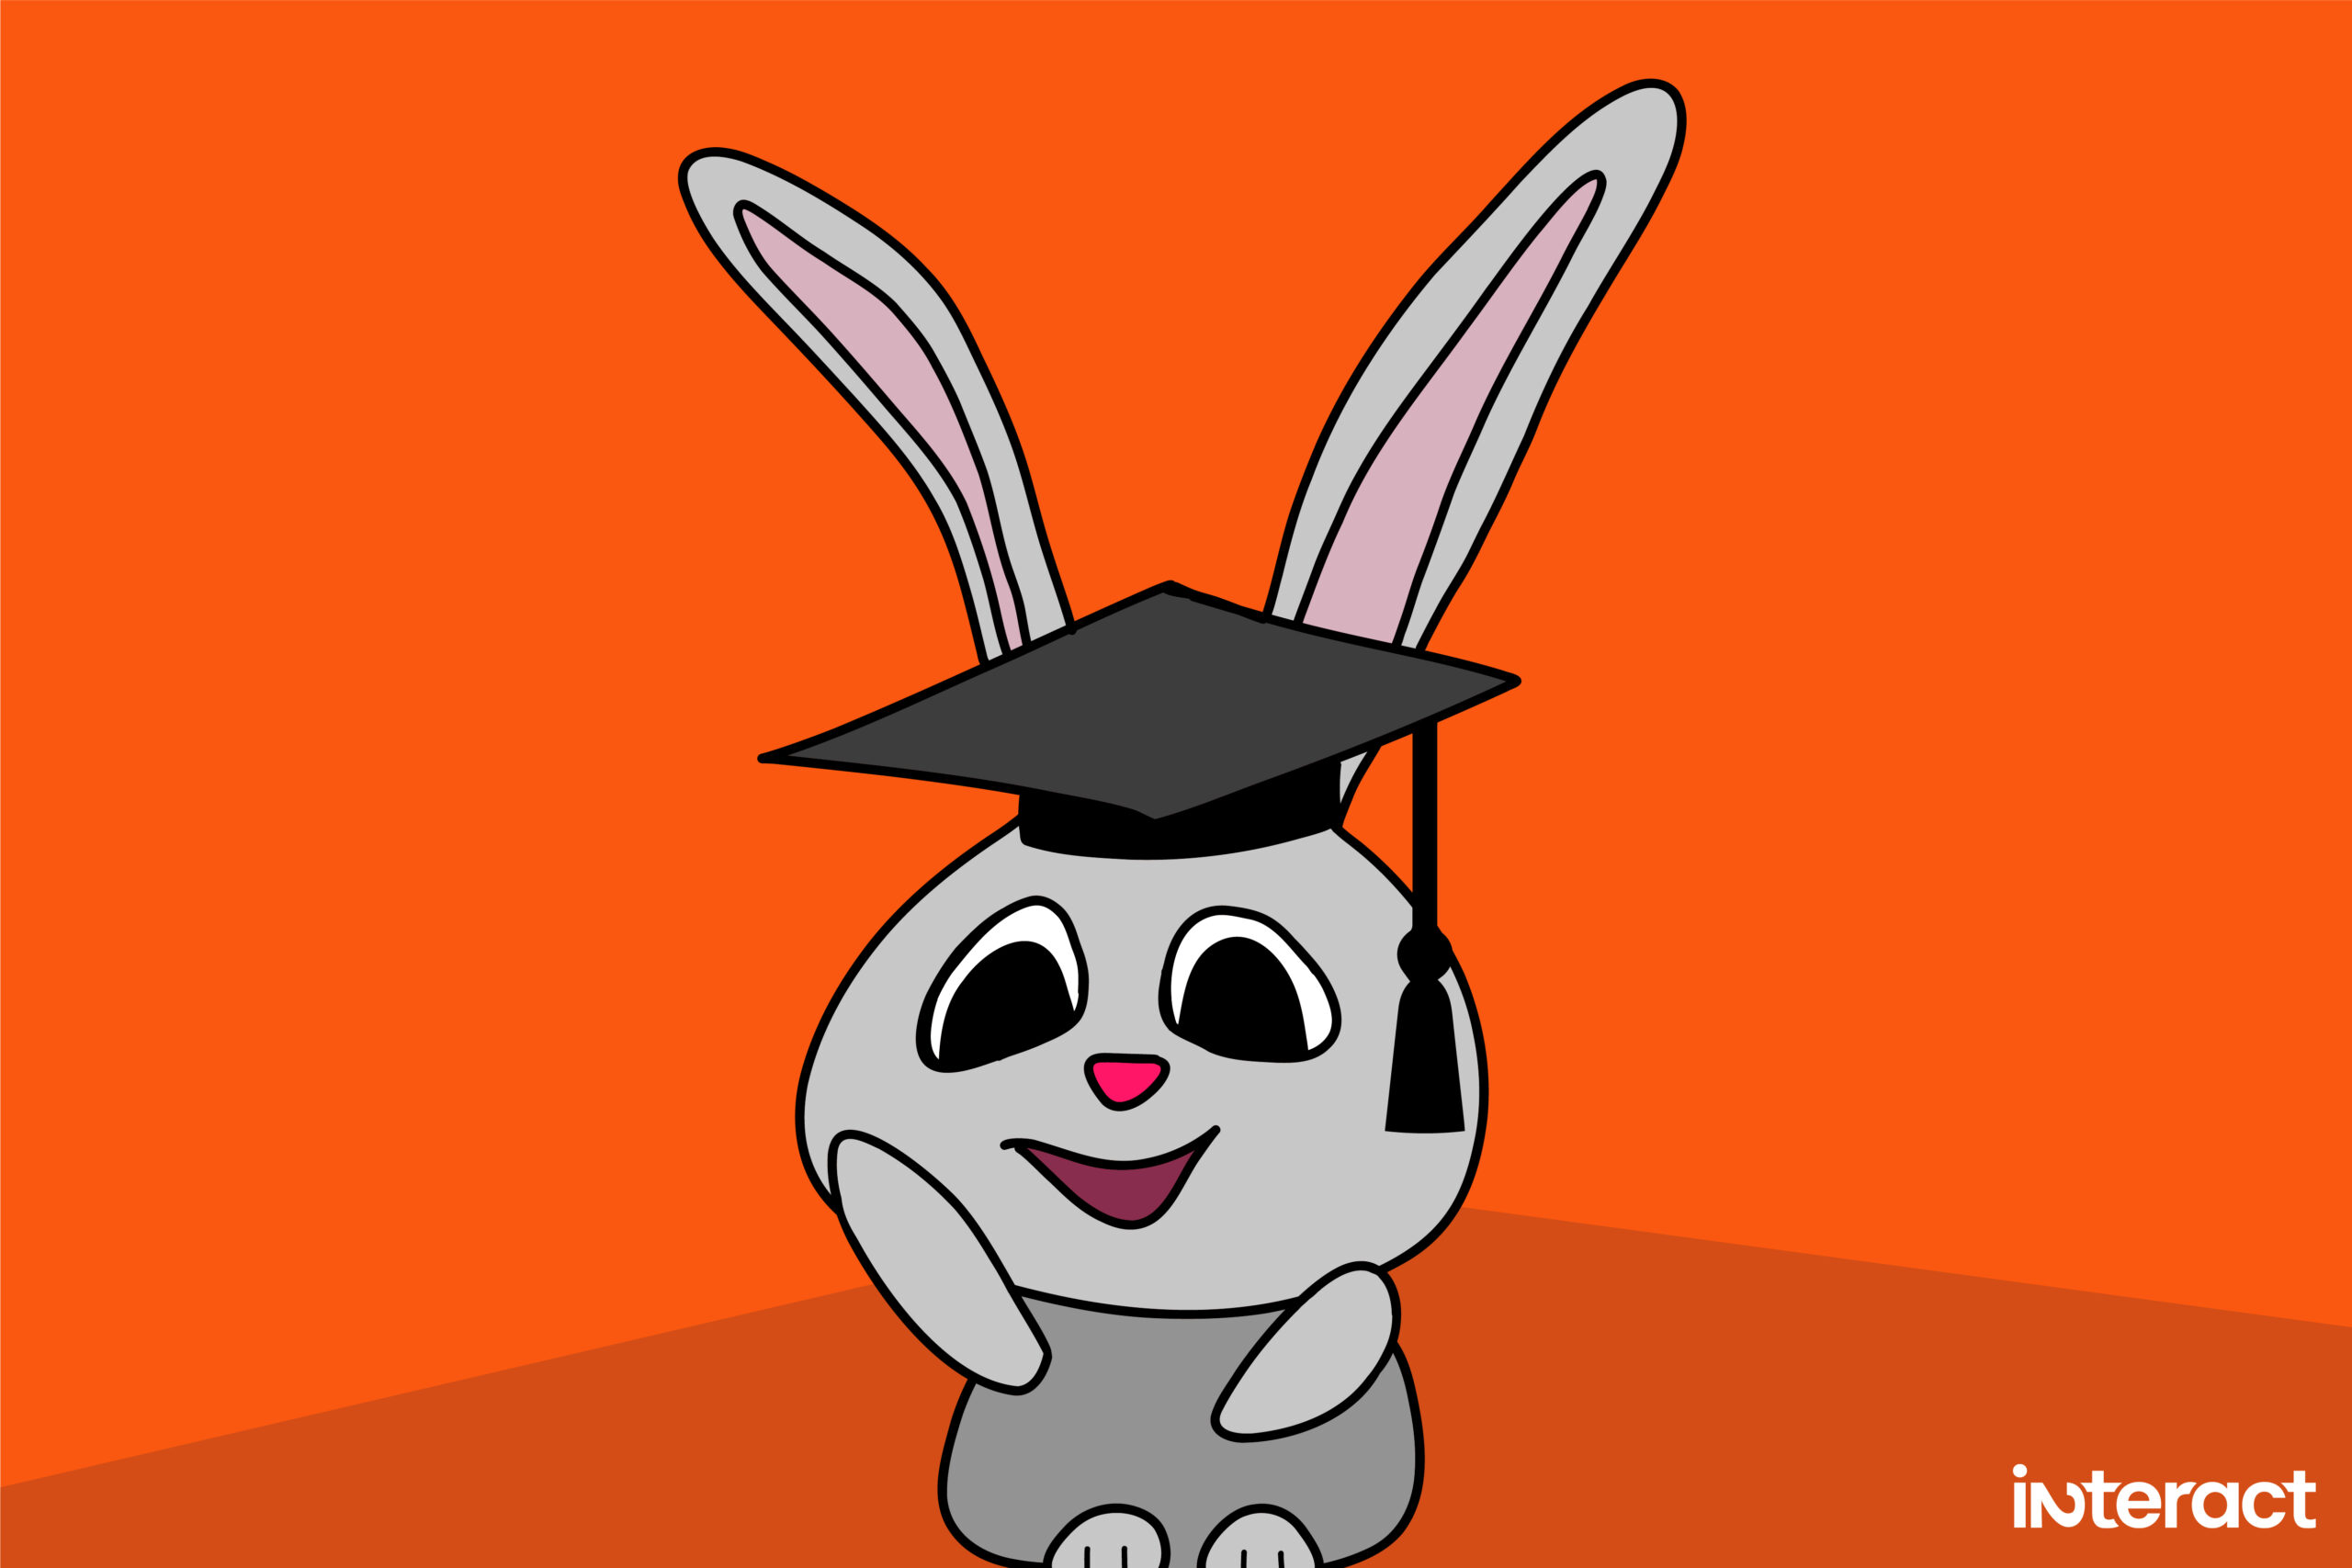 Bunny smiles proudly and waves, wearing a graduation cap and gown.